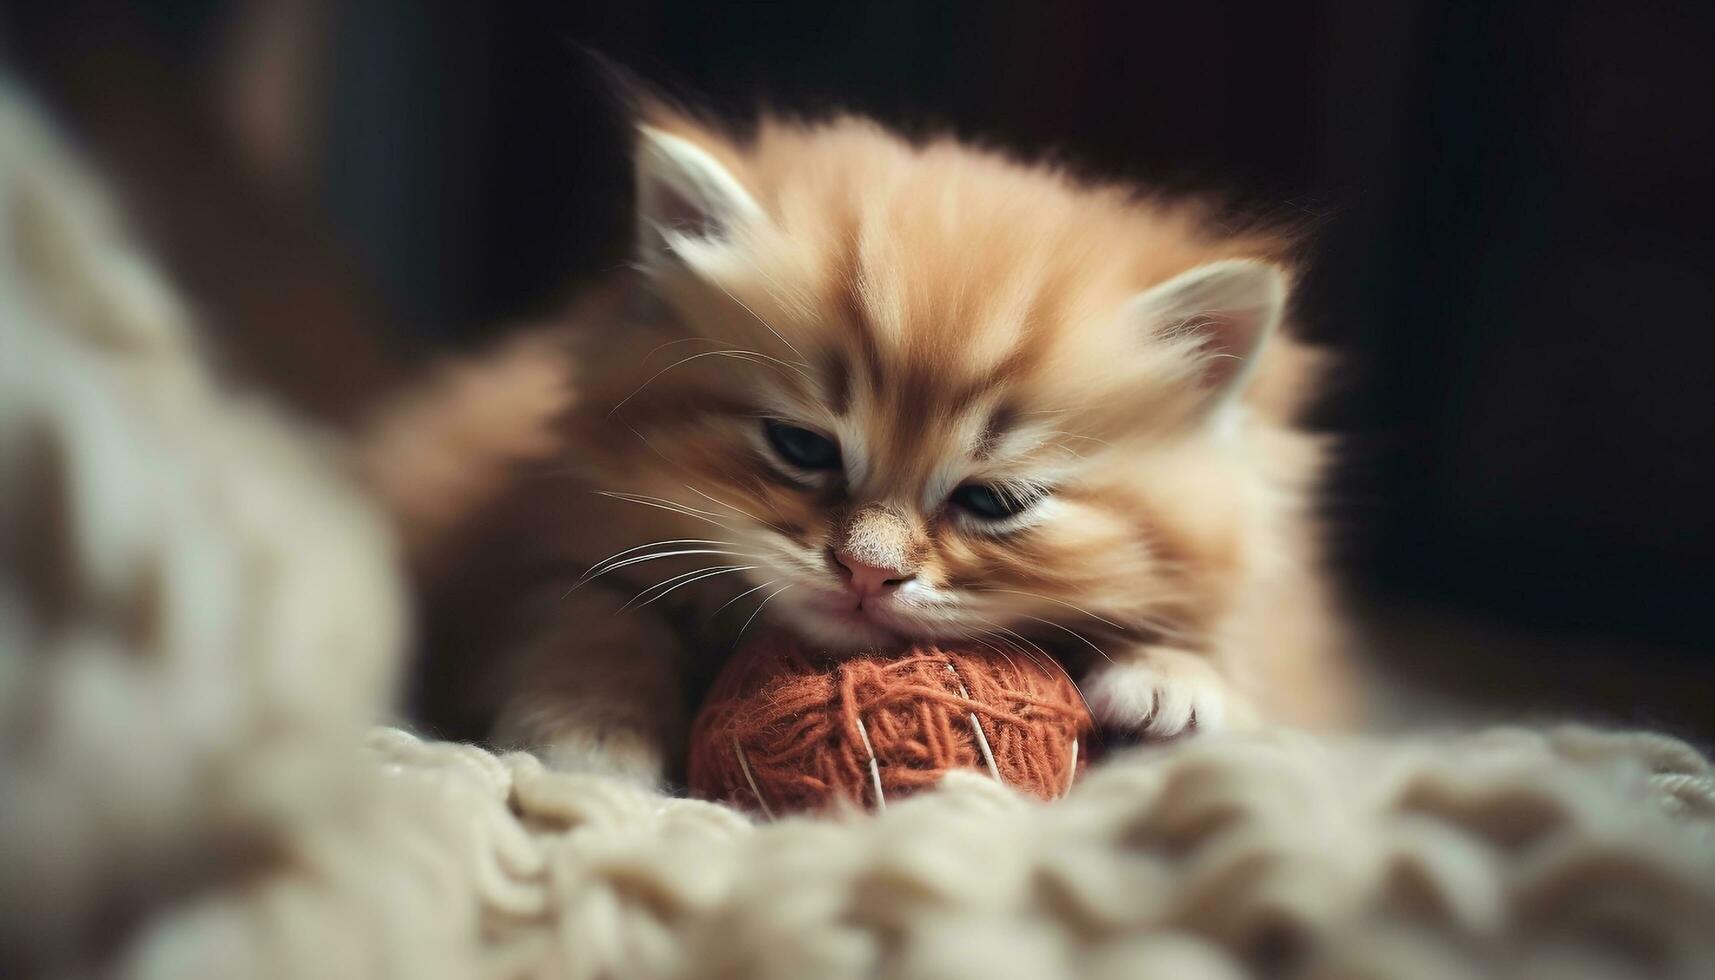 Cute kitten playing with a yellow woolen ball, looking playful generated by AI photo